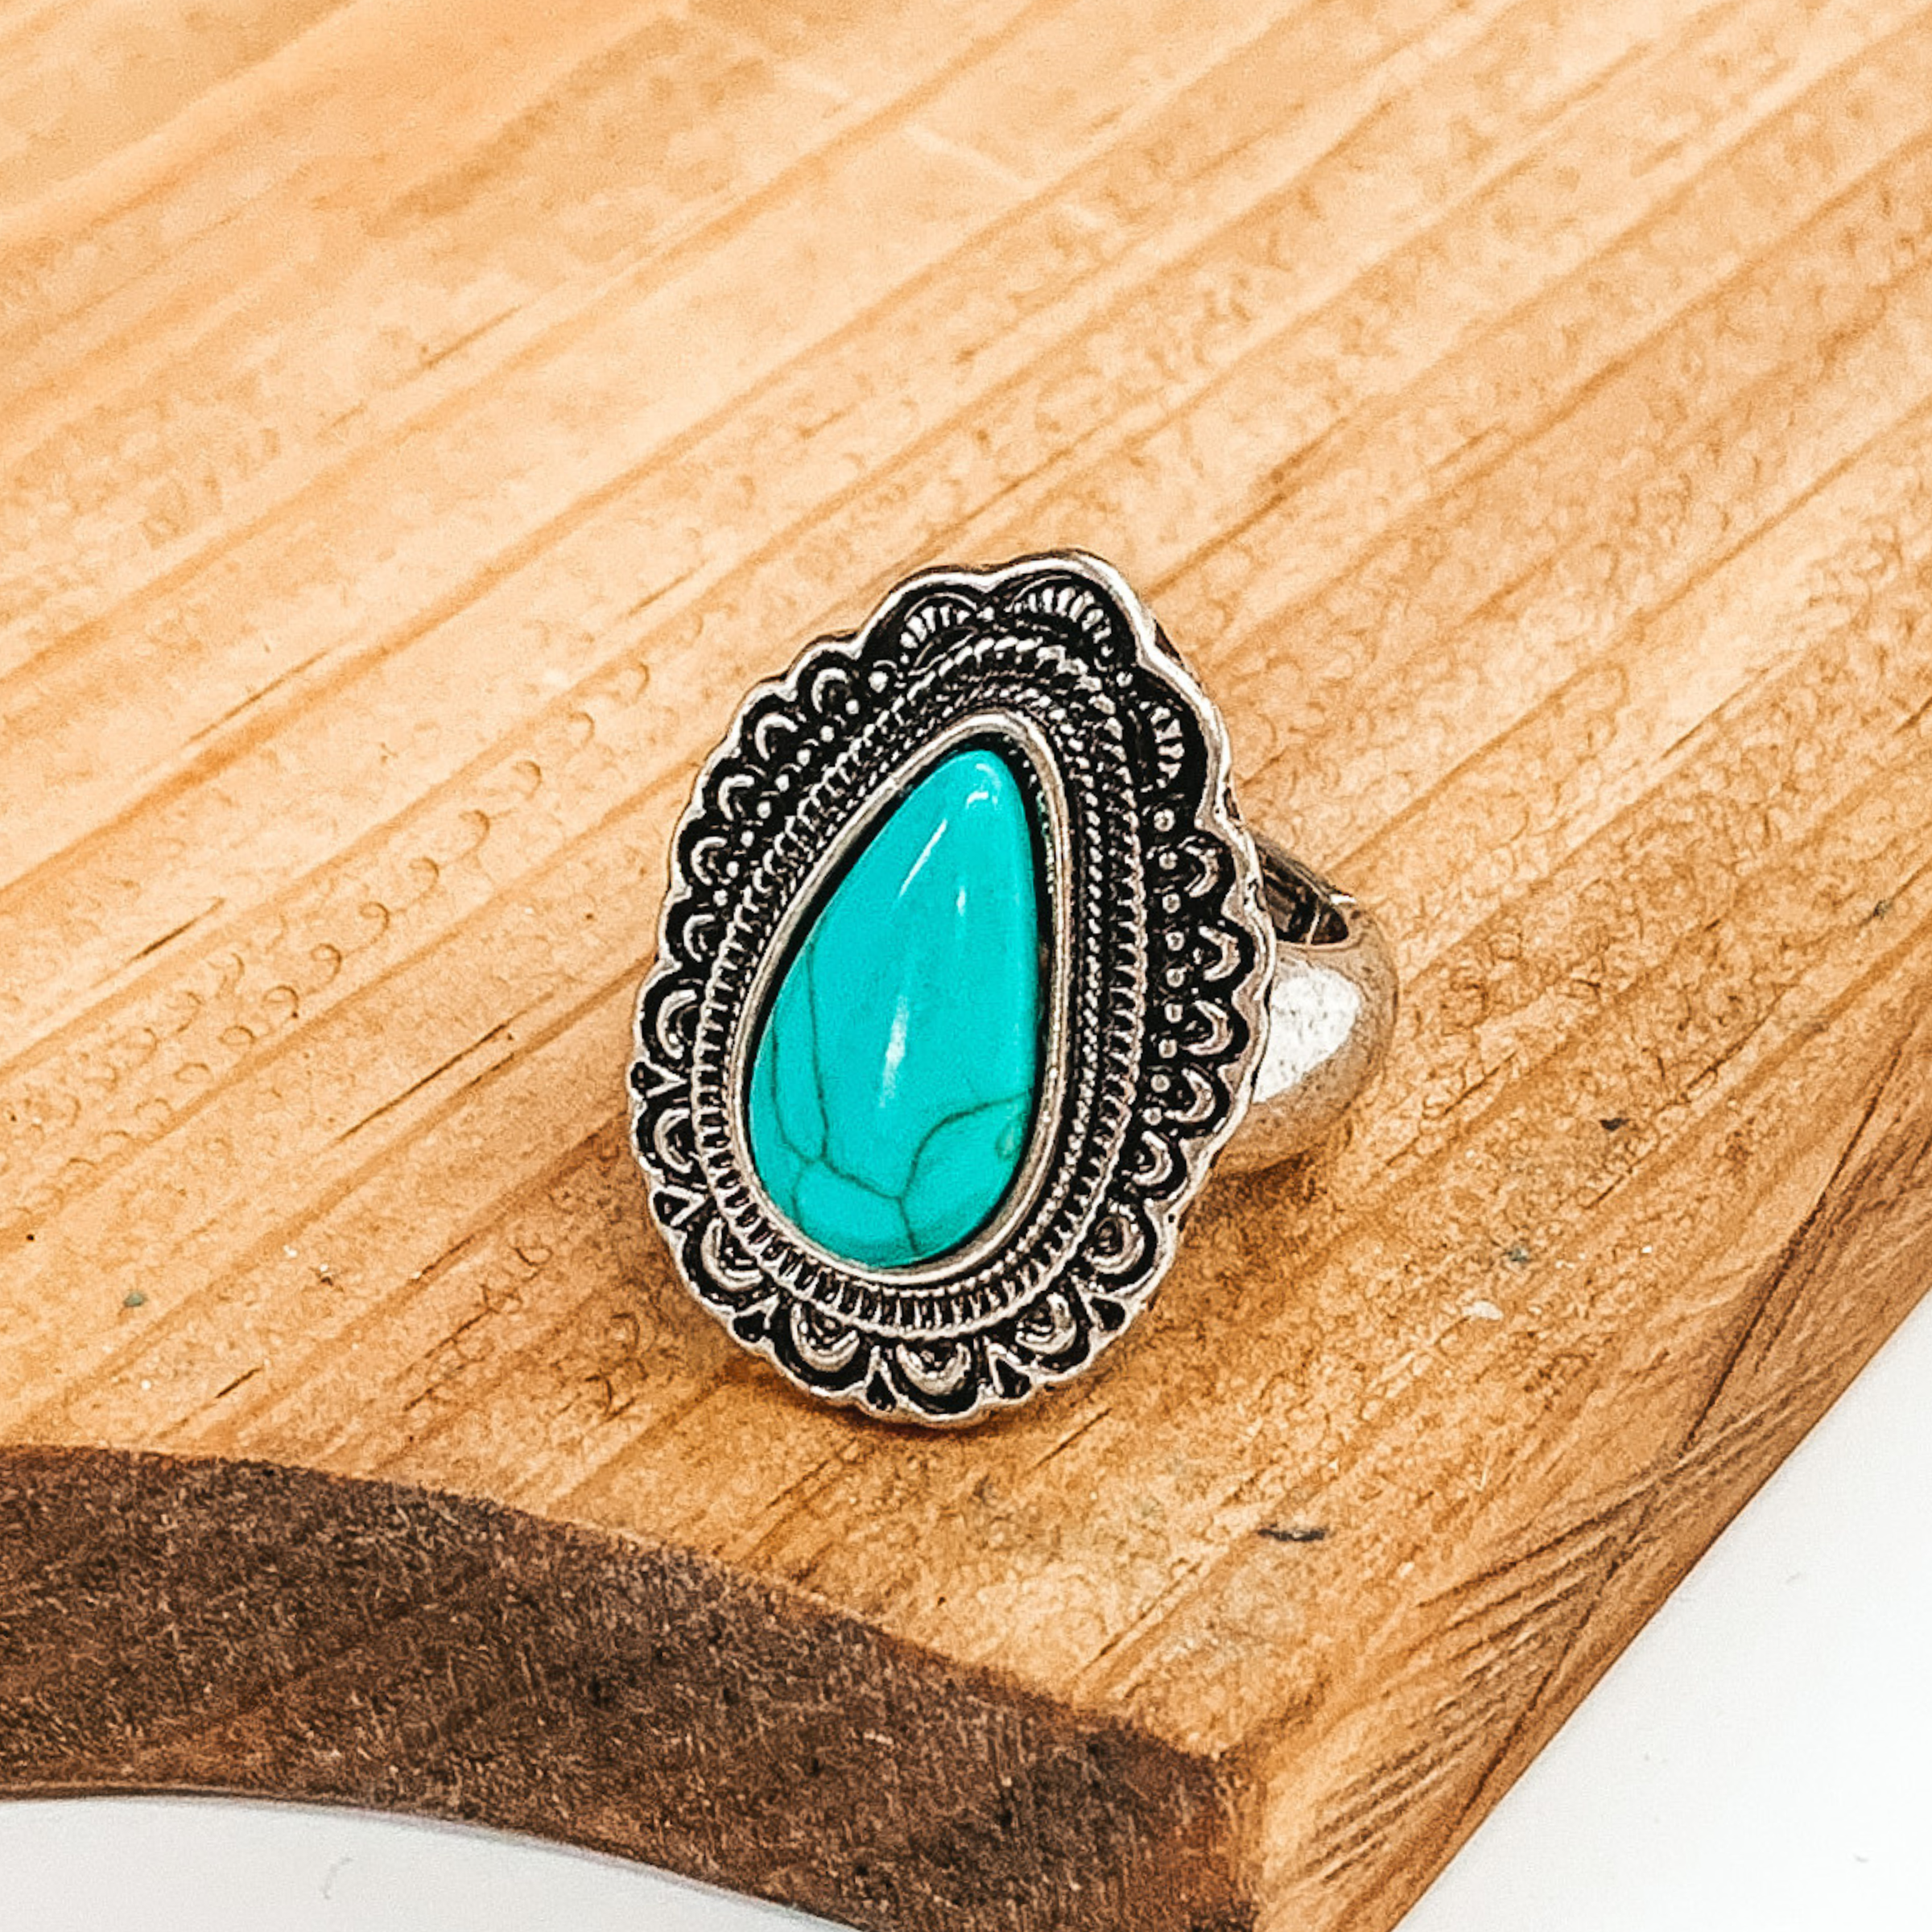 Silver stretchy ring that has a silver teardrop pendant with engraving detailing. In the center of the pendant, there is a turquoise teardrop stone. This ring is pictured laying on a brown block on a white background. 